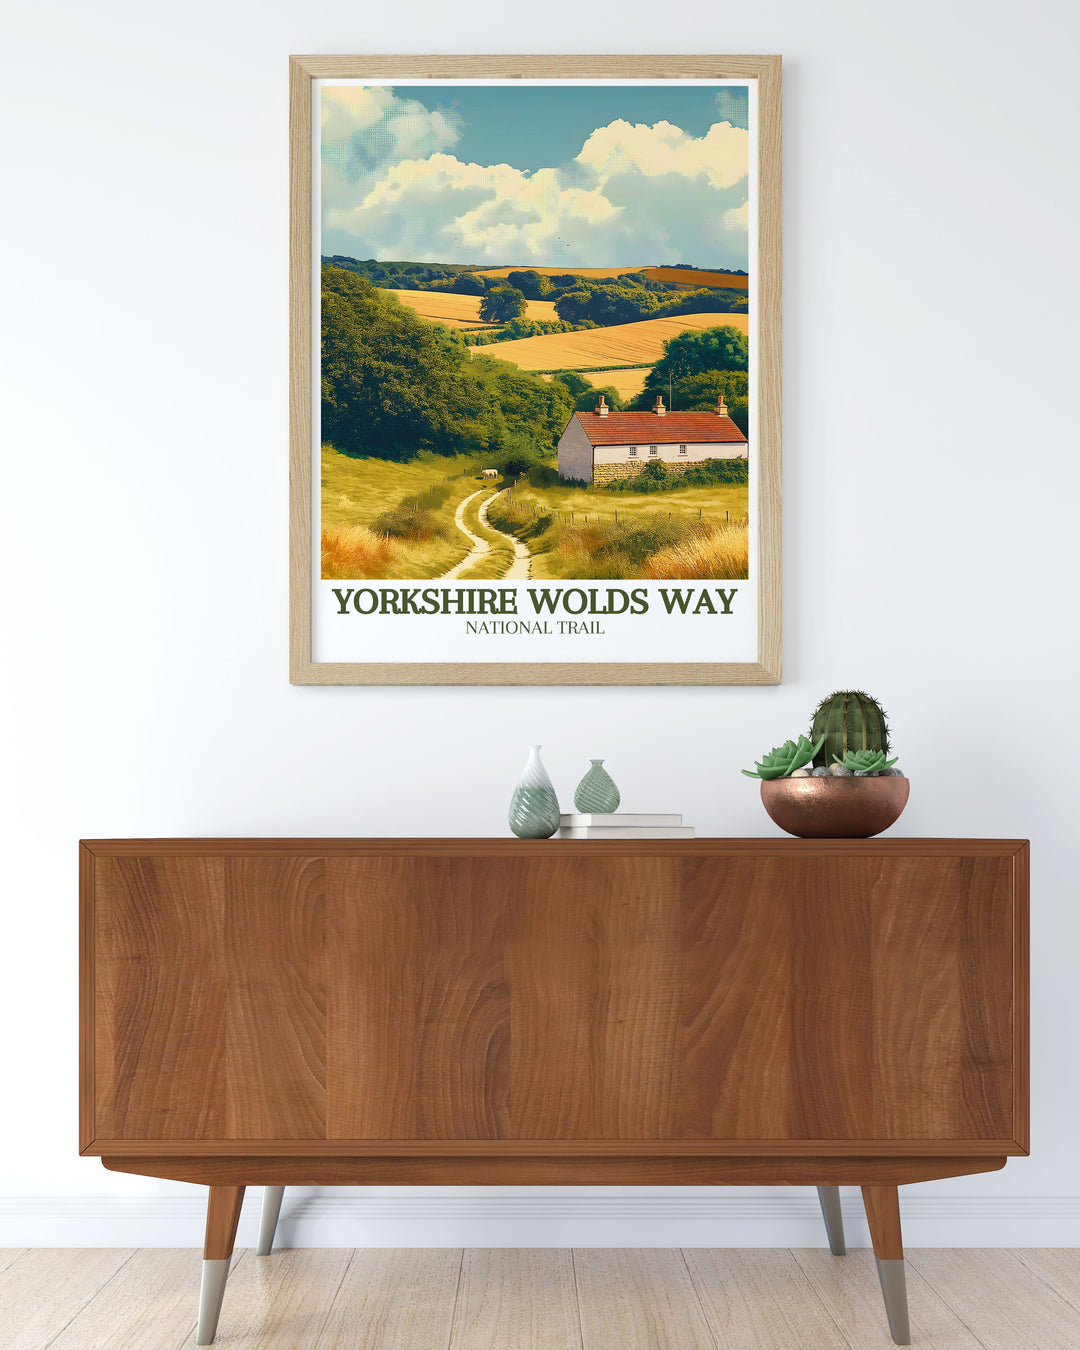 Personalized custom print of the Yorkshire Wolds Way, capturing the serene beauty and diverse landscapes of this national trail. The artwork offers a unique piece of art that reflects your love for hiking and the natural beauty of the UKs hidden gems, perfect for any home decor.